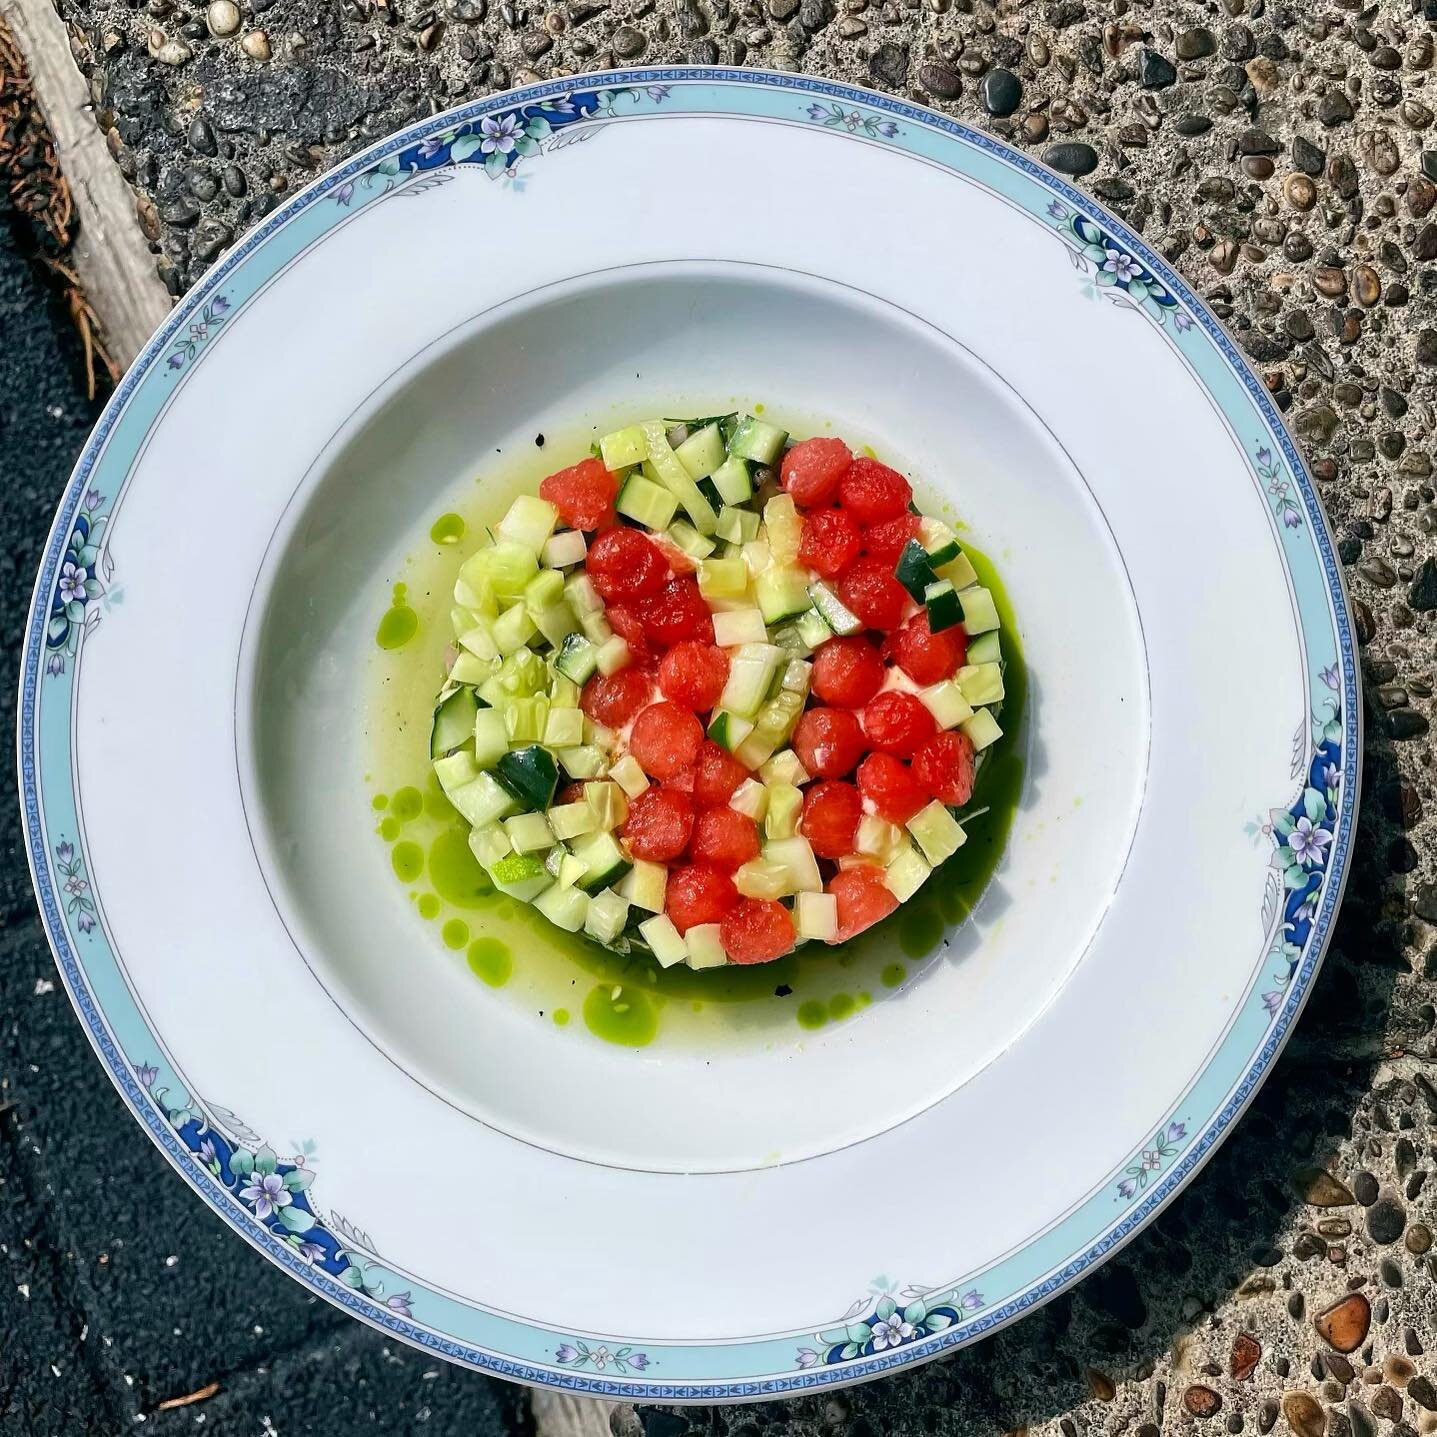 New dish alert. We&rsquo;re talking cucumber, watermelon (and pickled watermelon rind), ricotta, &amp; fermented chili. Cukes from @3springsfruit and @greenmeadowfarmpa.